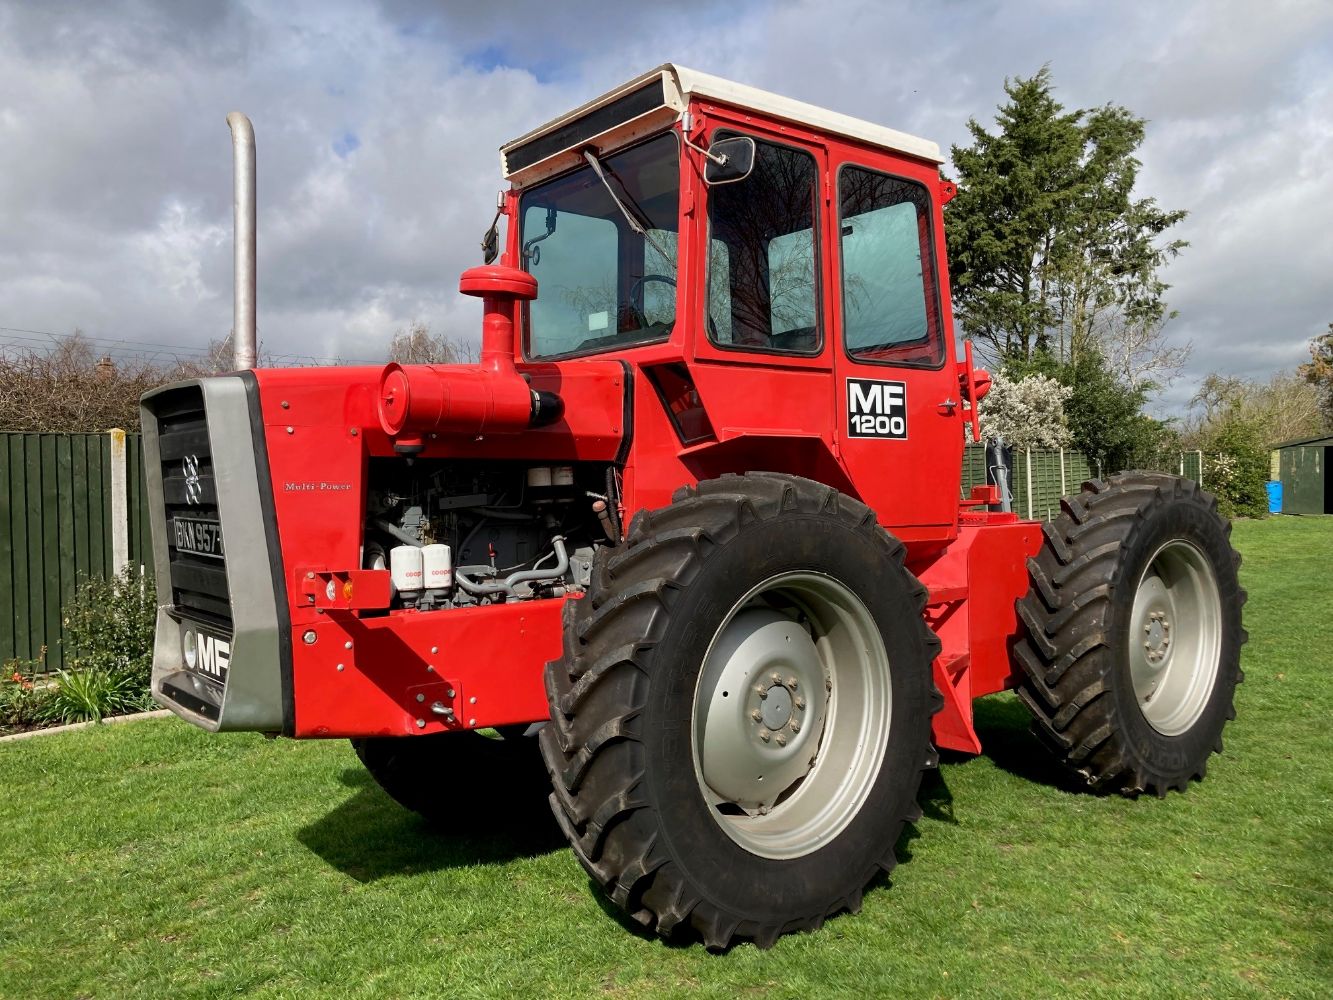 Timed Online Collective Sale of Combines, Tractors, Plant, Vehicles, Trailers, Machinery, Tools & Spares